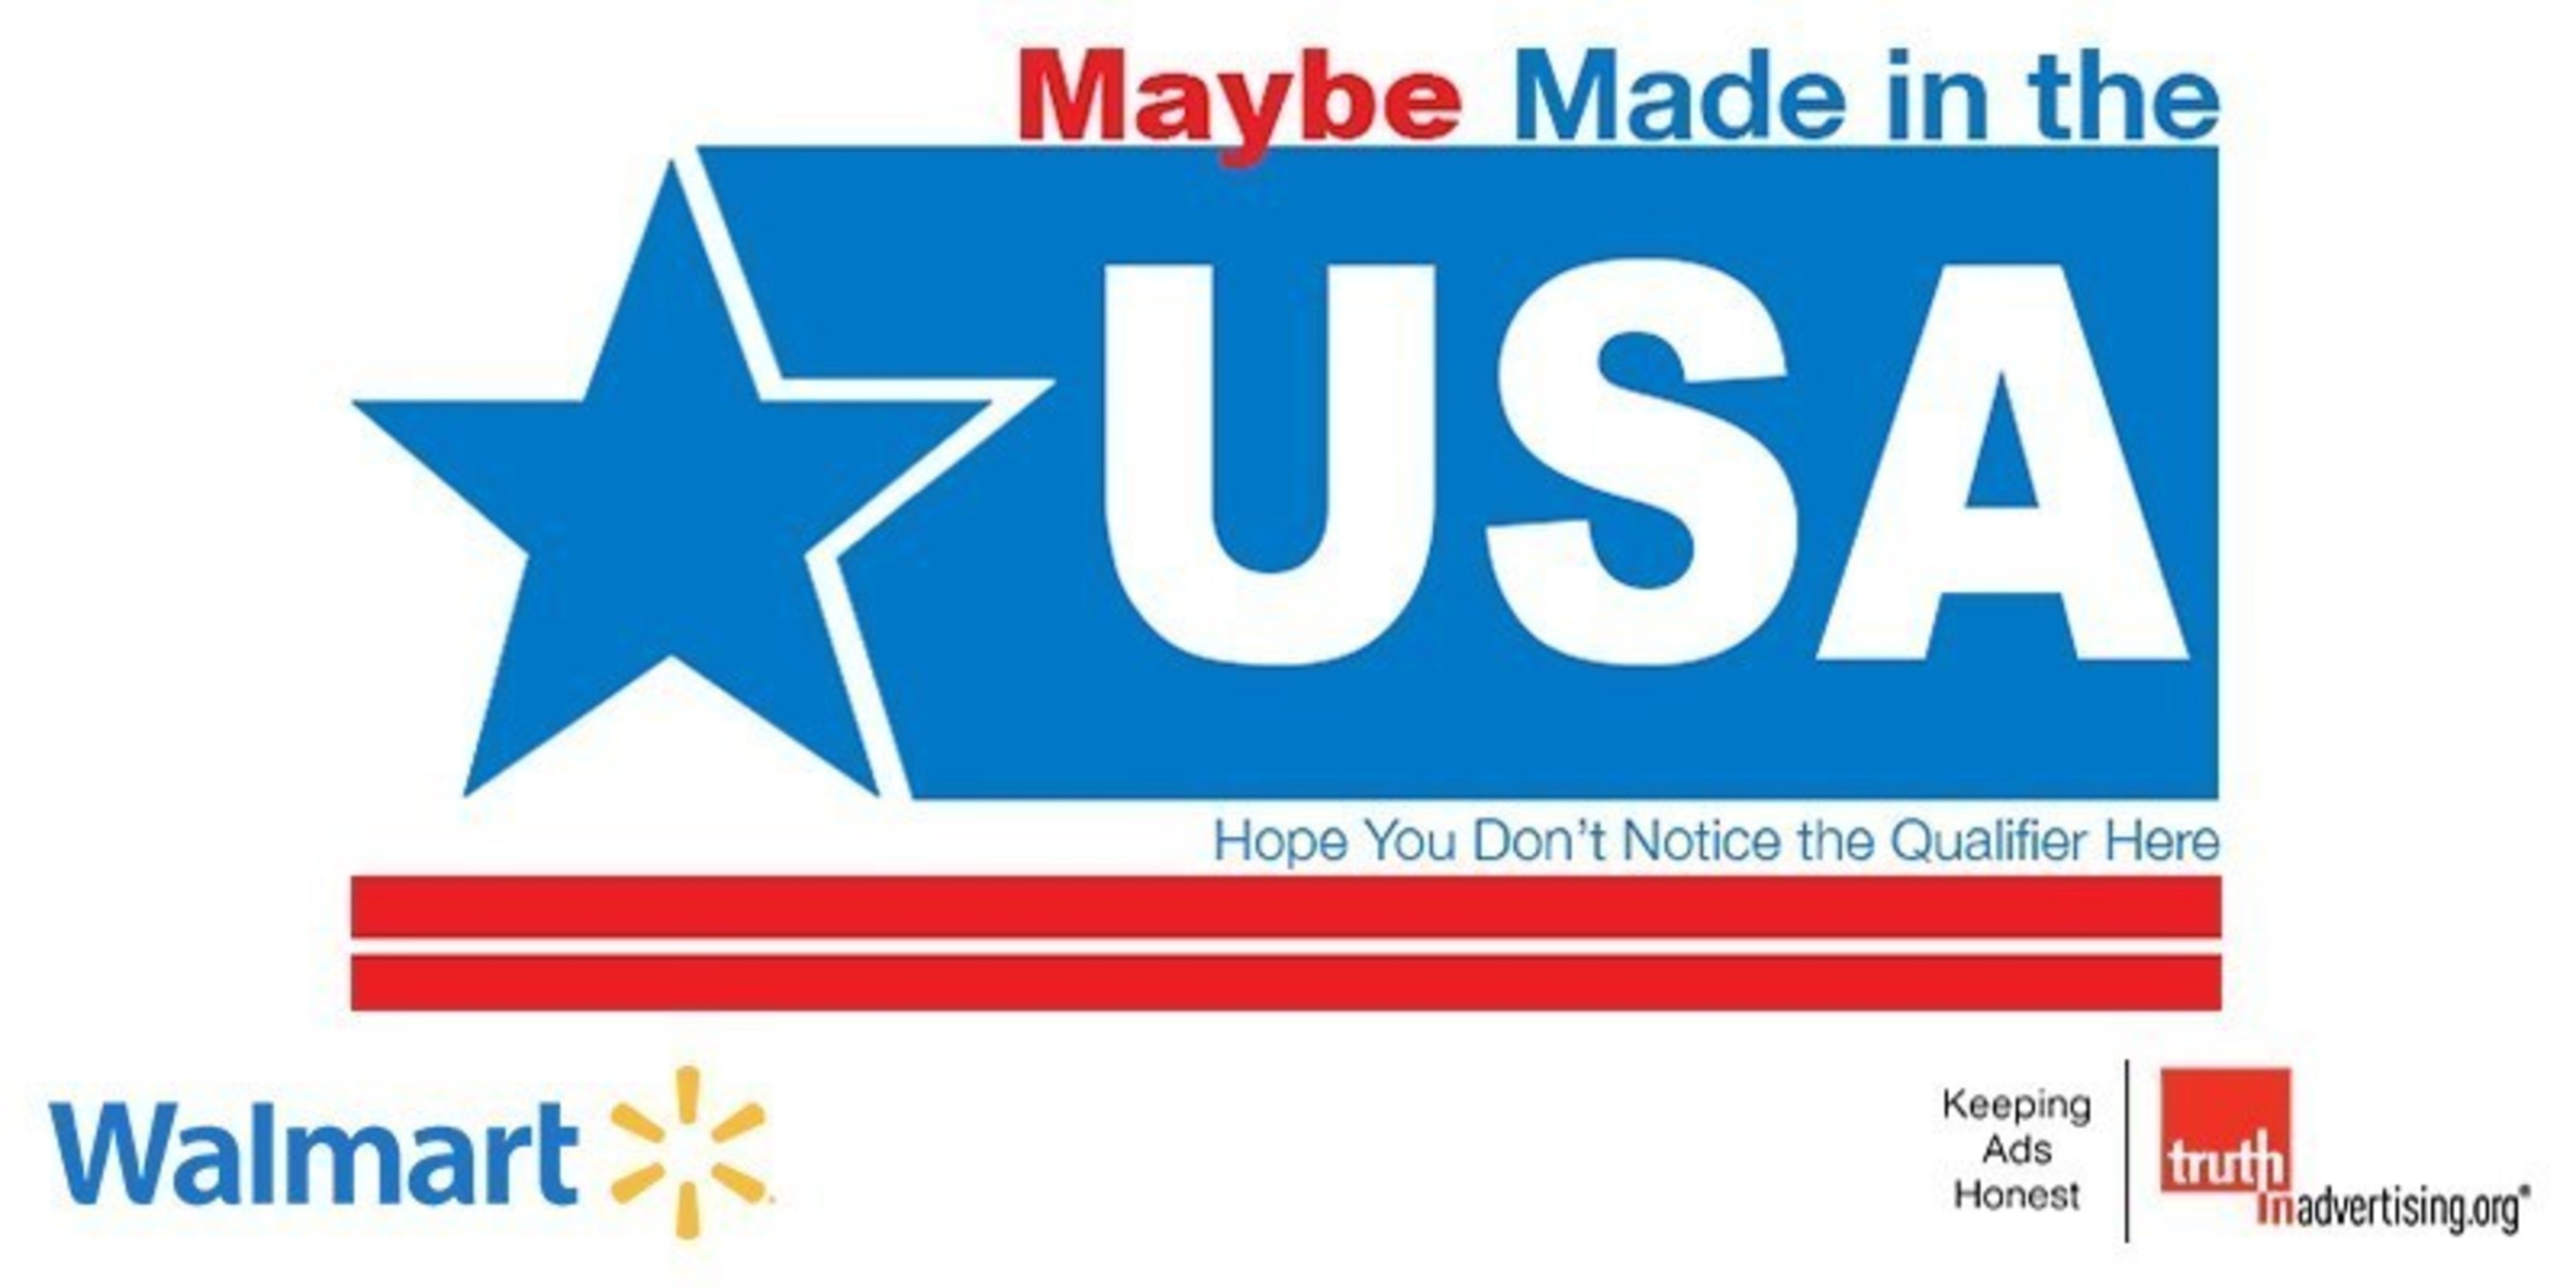 Walmart Continues Use of Deceptive Made in USA Claims According to Ad Watchdog